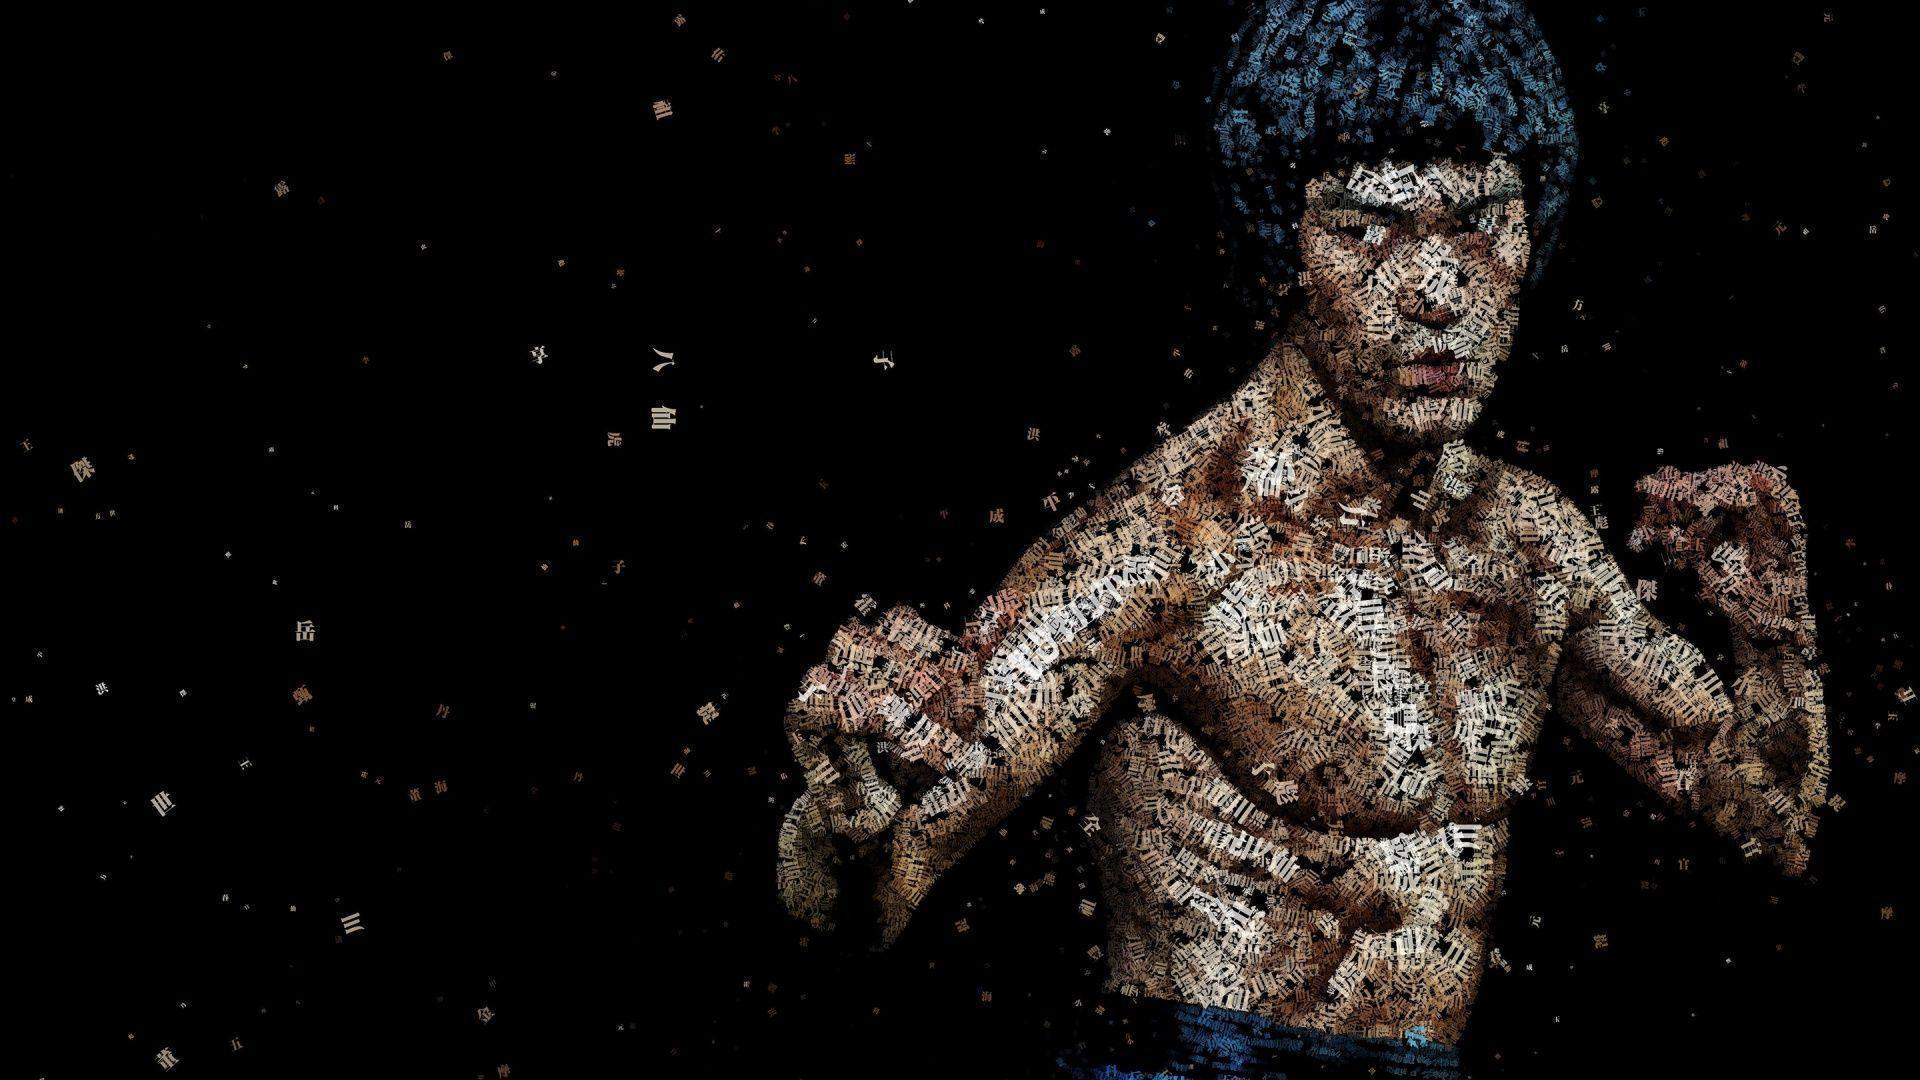 Abstract, 1920x1080 Bruce Lee Wallpaper 1080x1920px 1920x1080